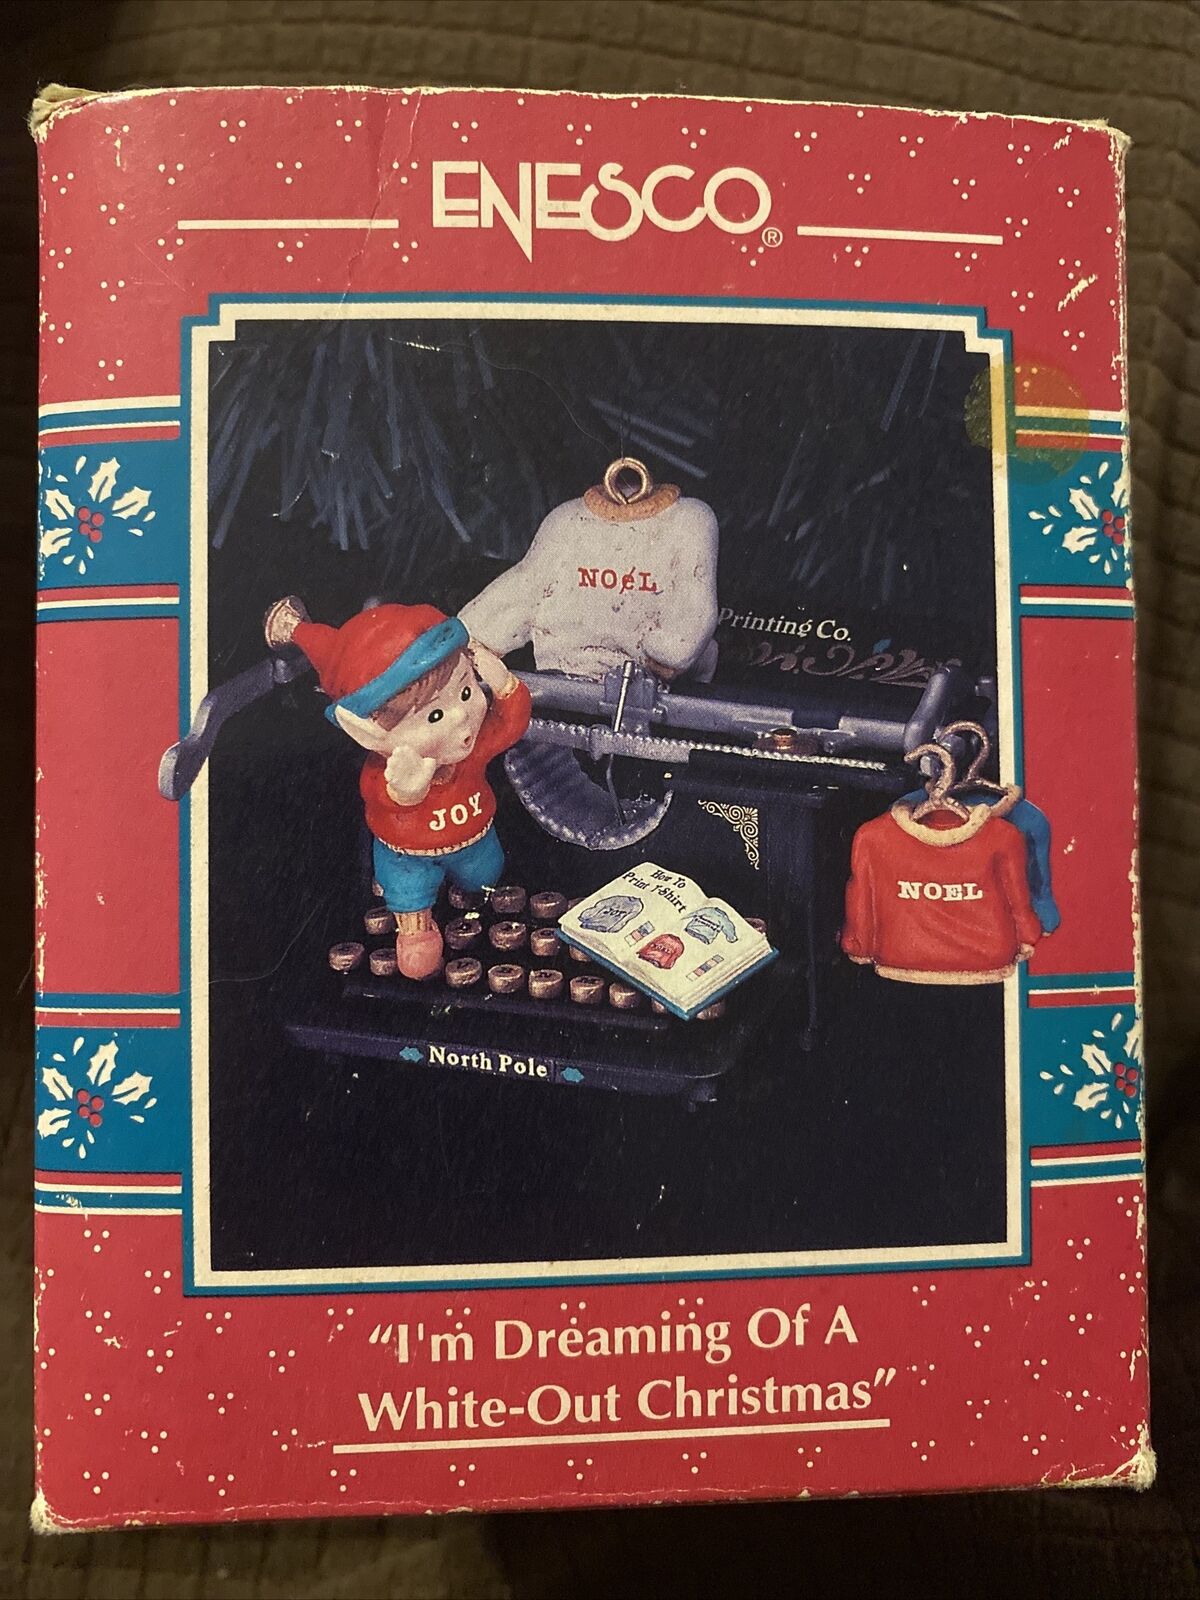 1993 Enesco Treasury Ornament  I'M DREAMING OF A WHITE-OUT CHRISTMAS  3rd series